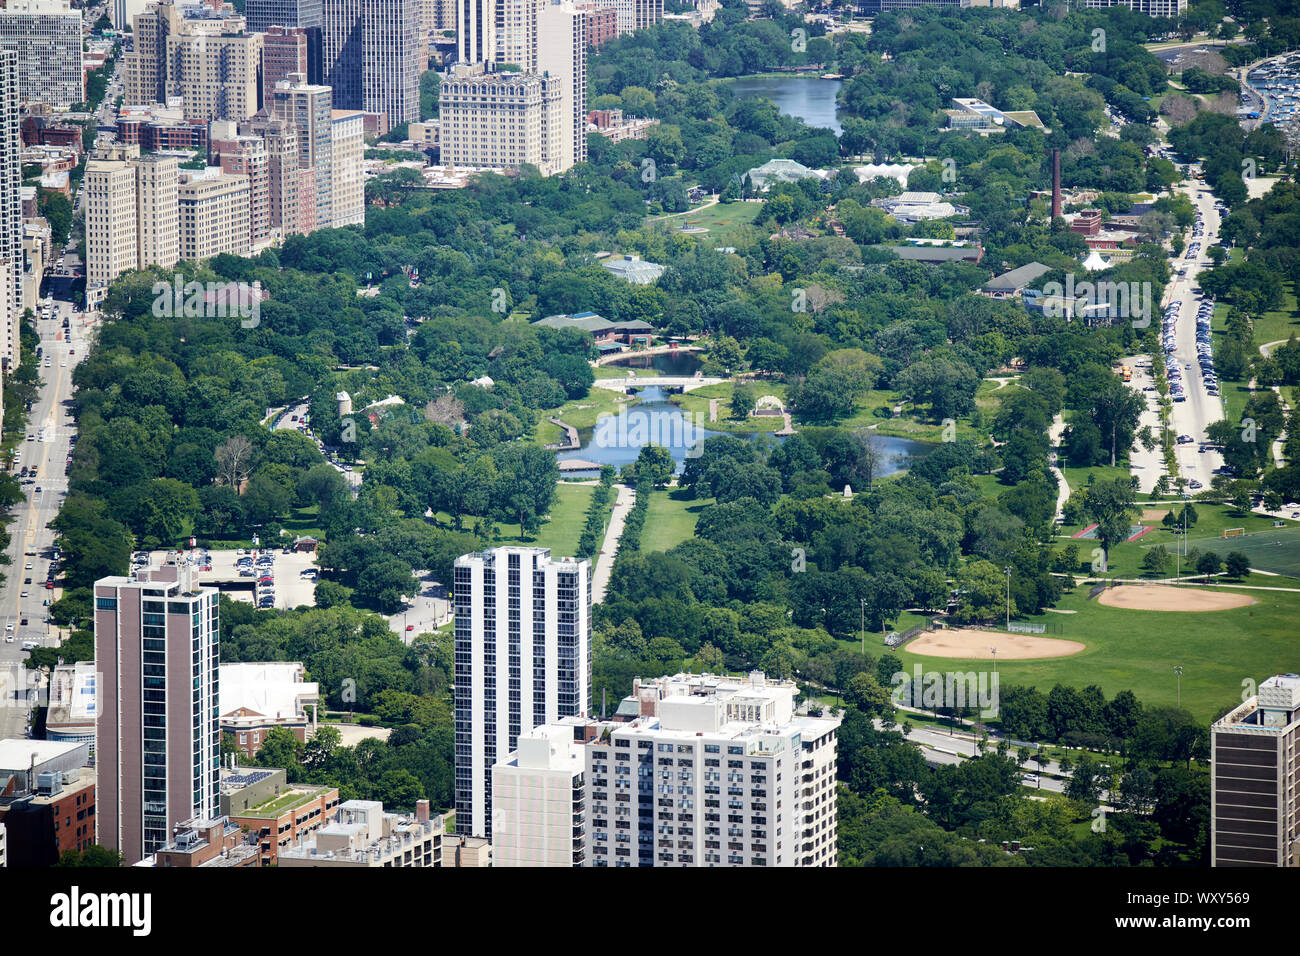 aerial view of lincoln park zoo in chicago illinois united states of america Stock Photo